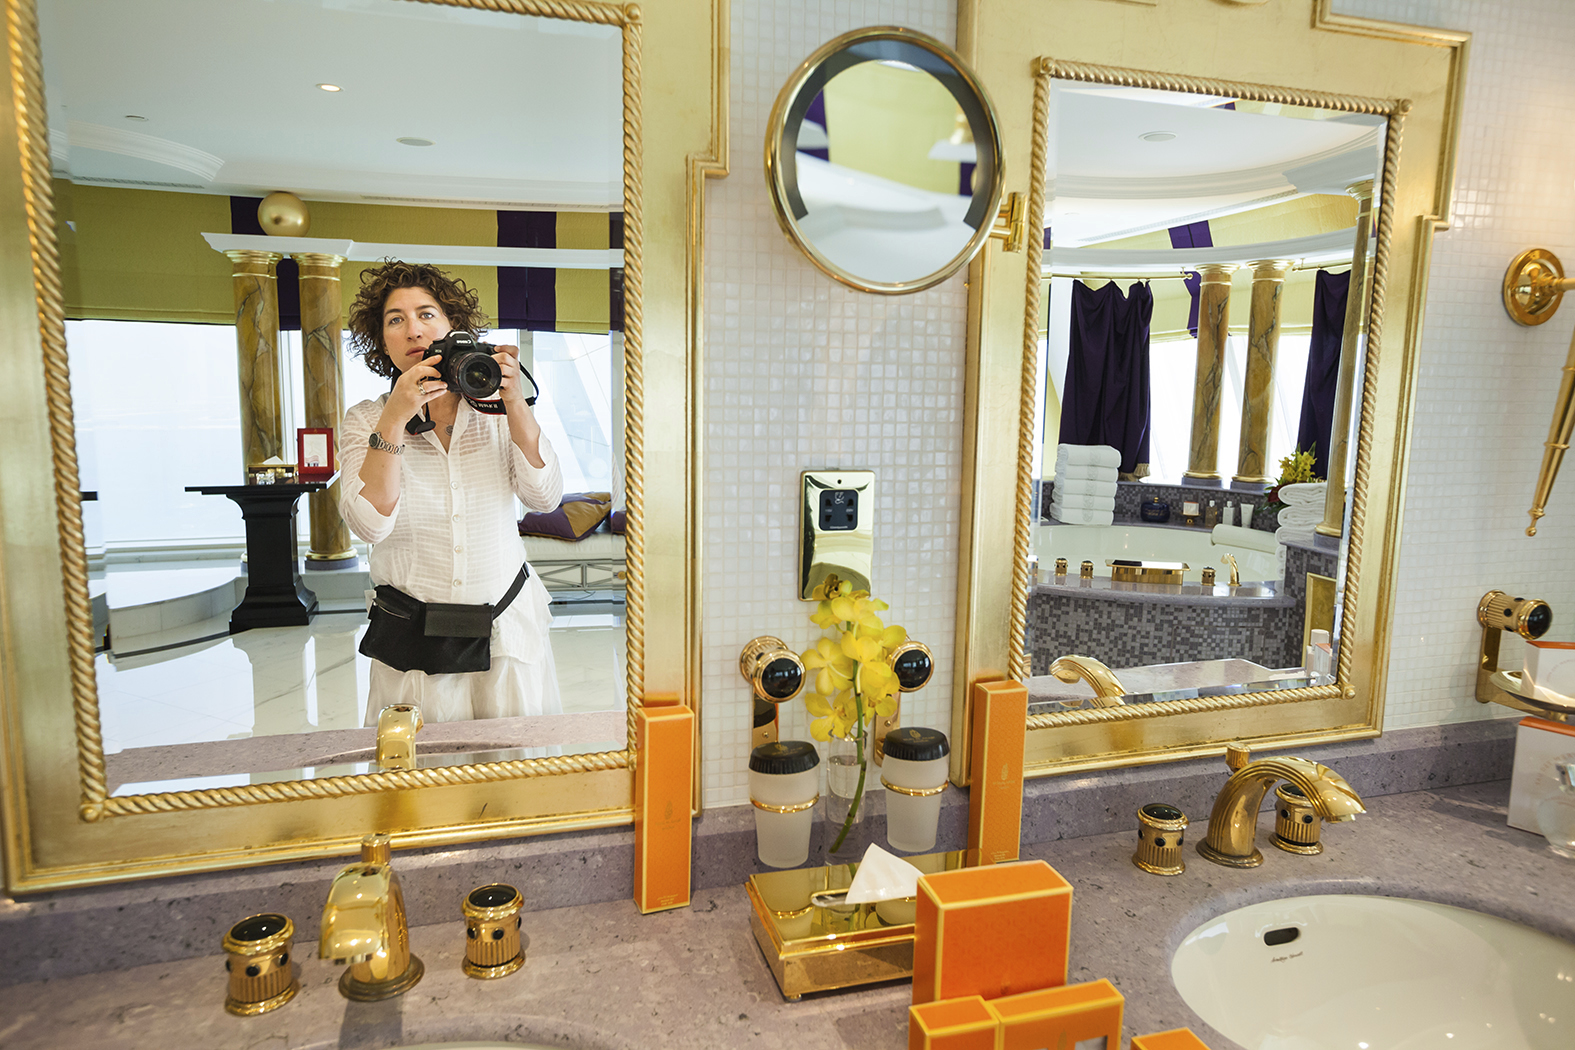 Lauren Greenfield catches herself in the mirror in the Presidential Suite at the Burj Al Arab hotel, Dubai, UAE, 2009. A still from Generation Wealth